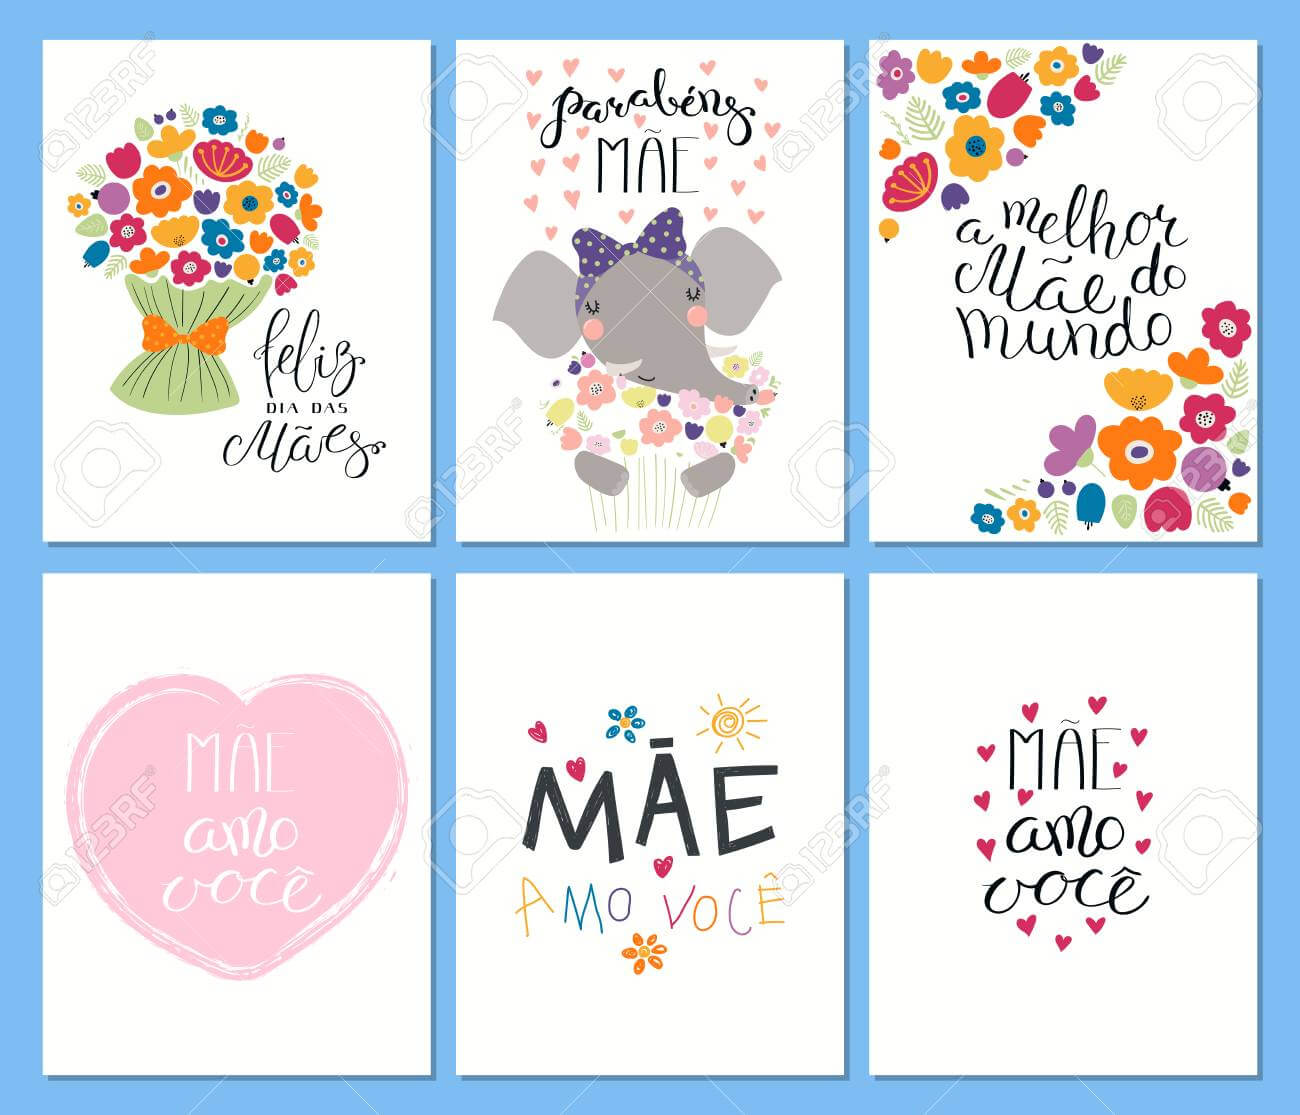 Set Of Mother's Day Cards Templates With Quotes In Portuguese Intended For Mothers Day Card Templates